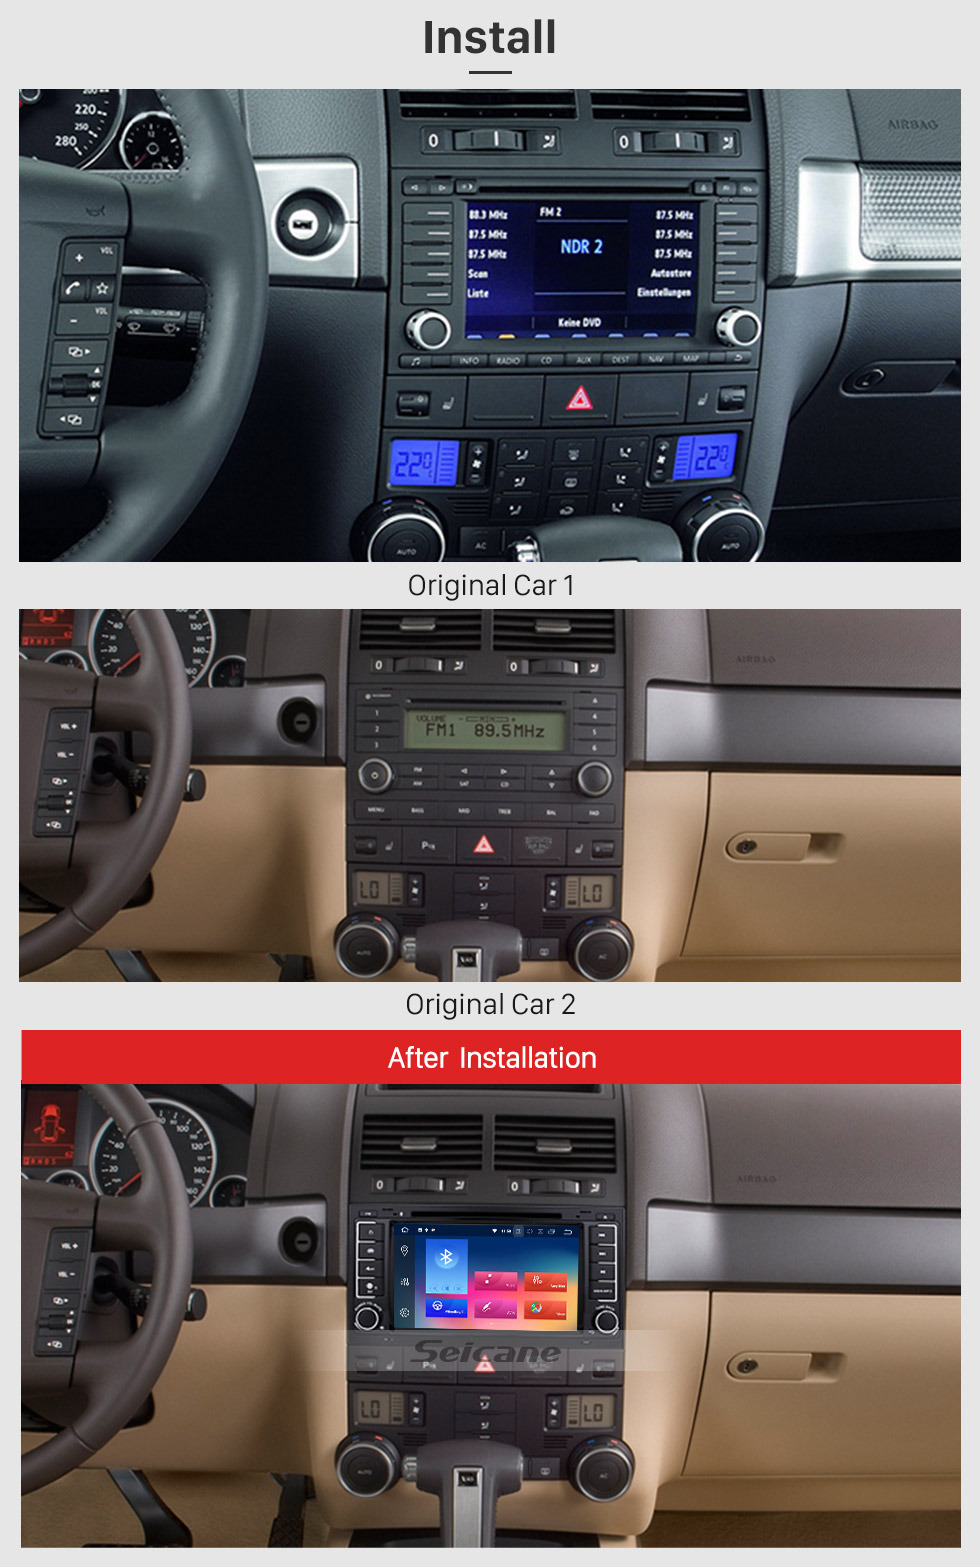 Seicane All-in-one Android 9.0 Car DVD GPS System for 2003-2014 VW Volkswagen Transporter with 1080P Radio RDS WiFi 3G Bluetooth AUX OBD2 Mirror Link